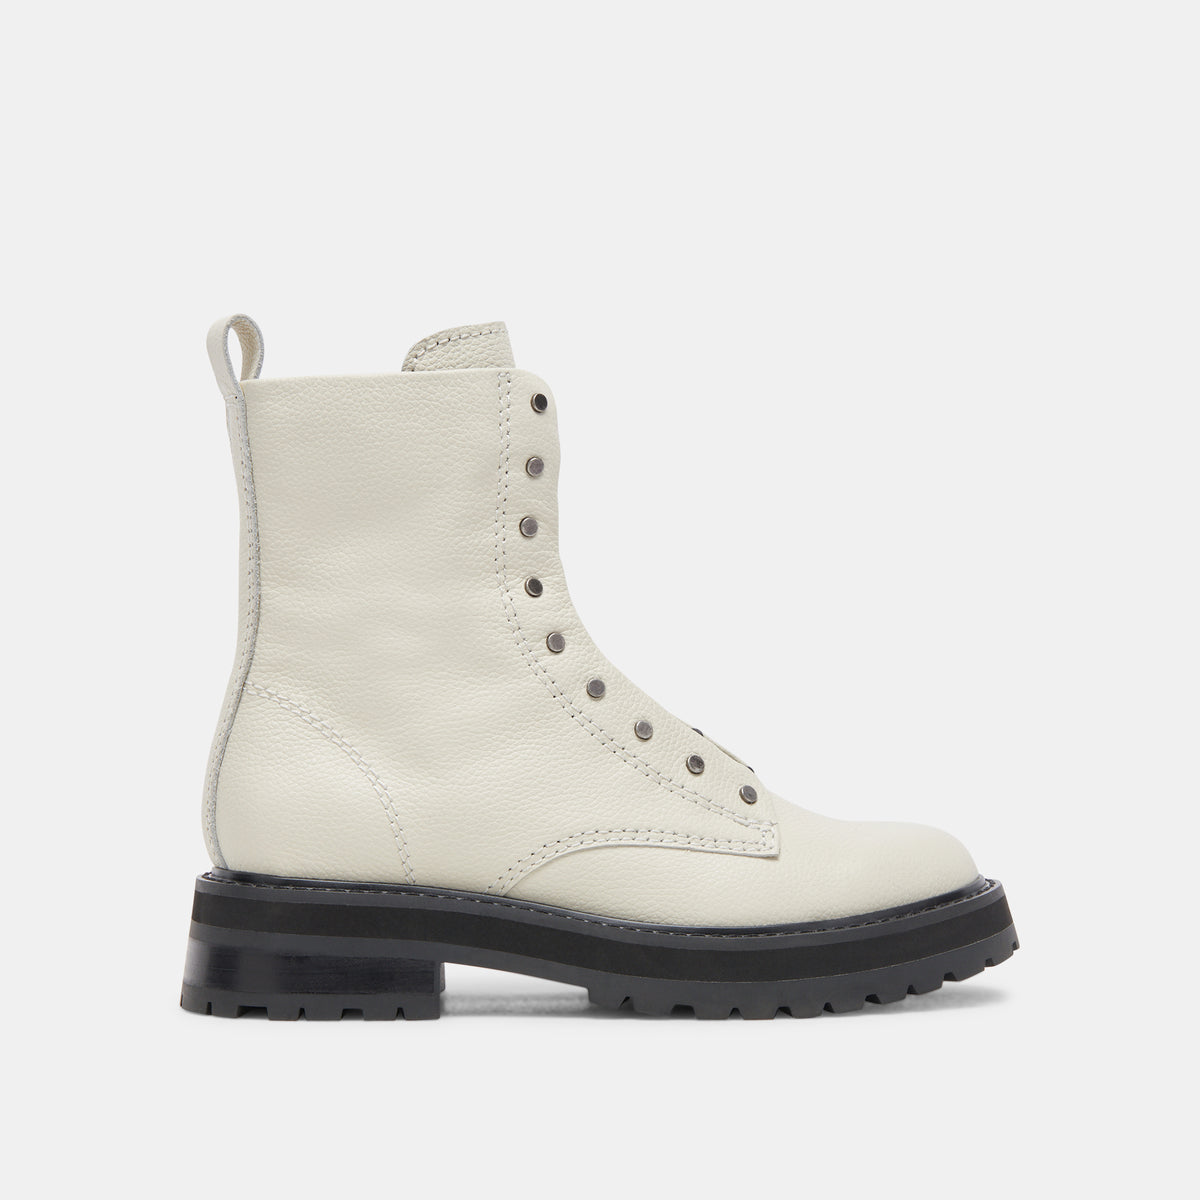 RANIER BOOTS OFF WHITE LEATHER – Dolce Vita